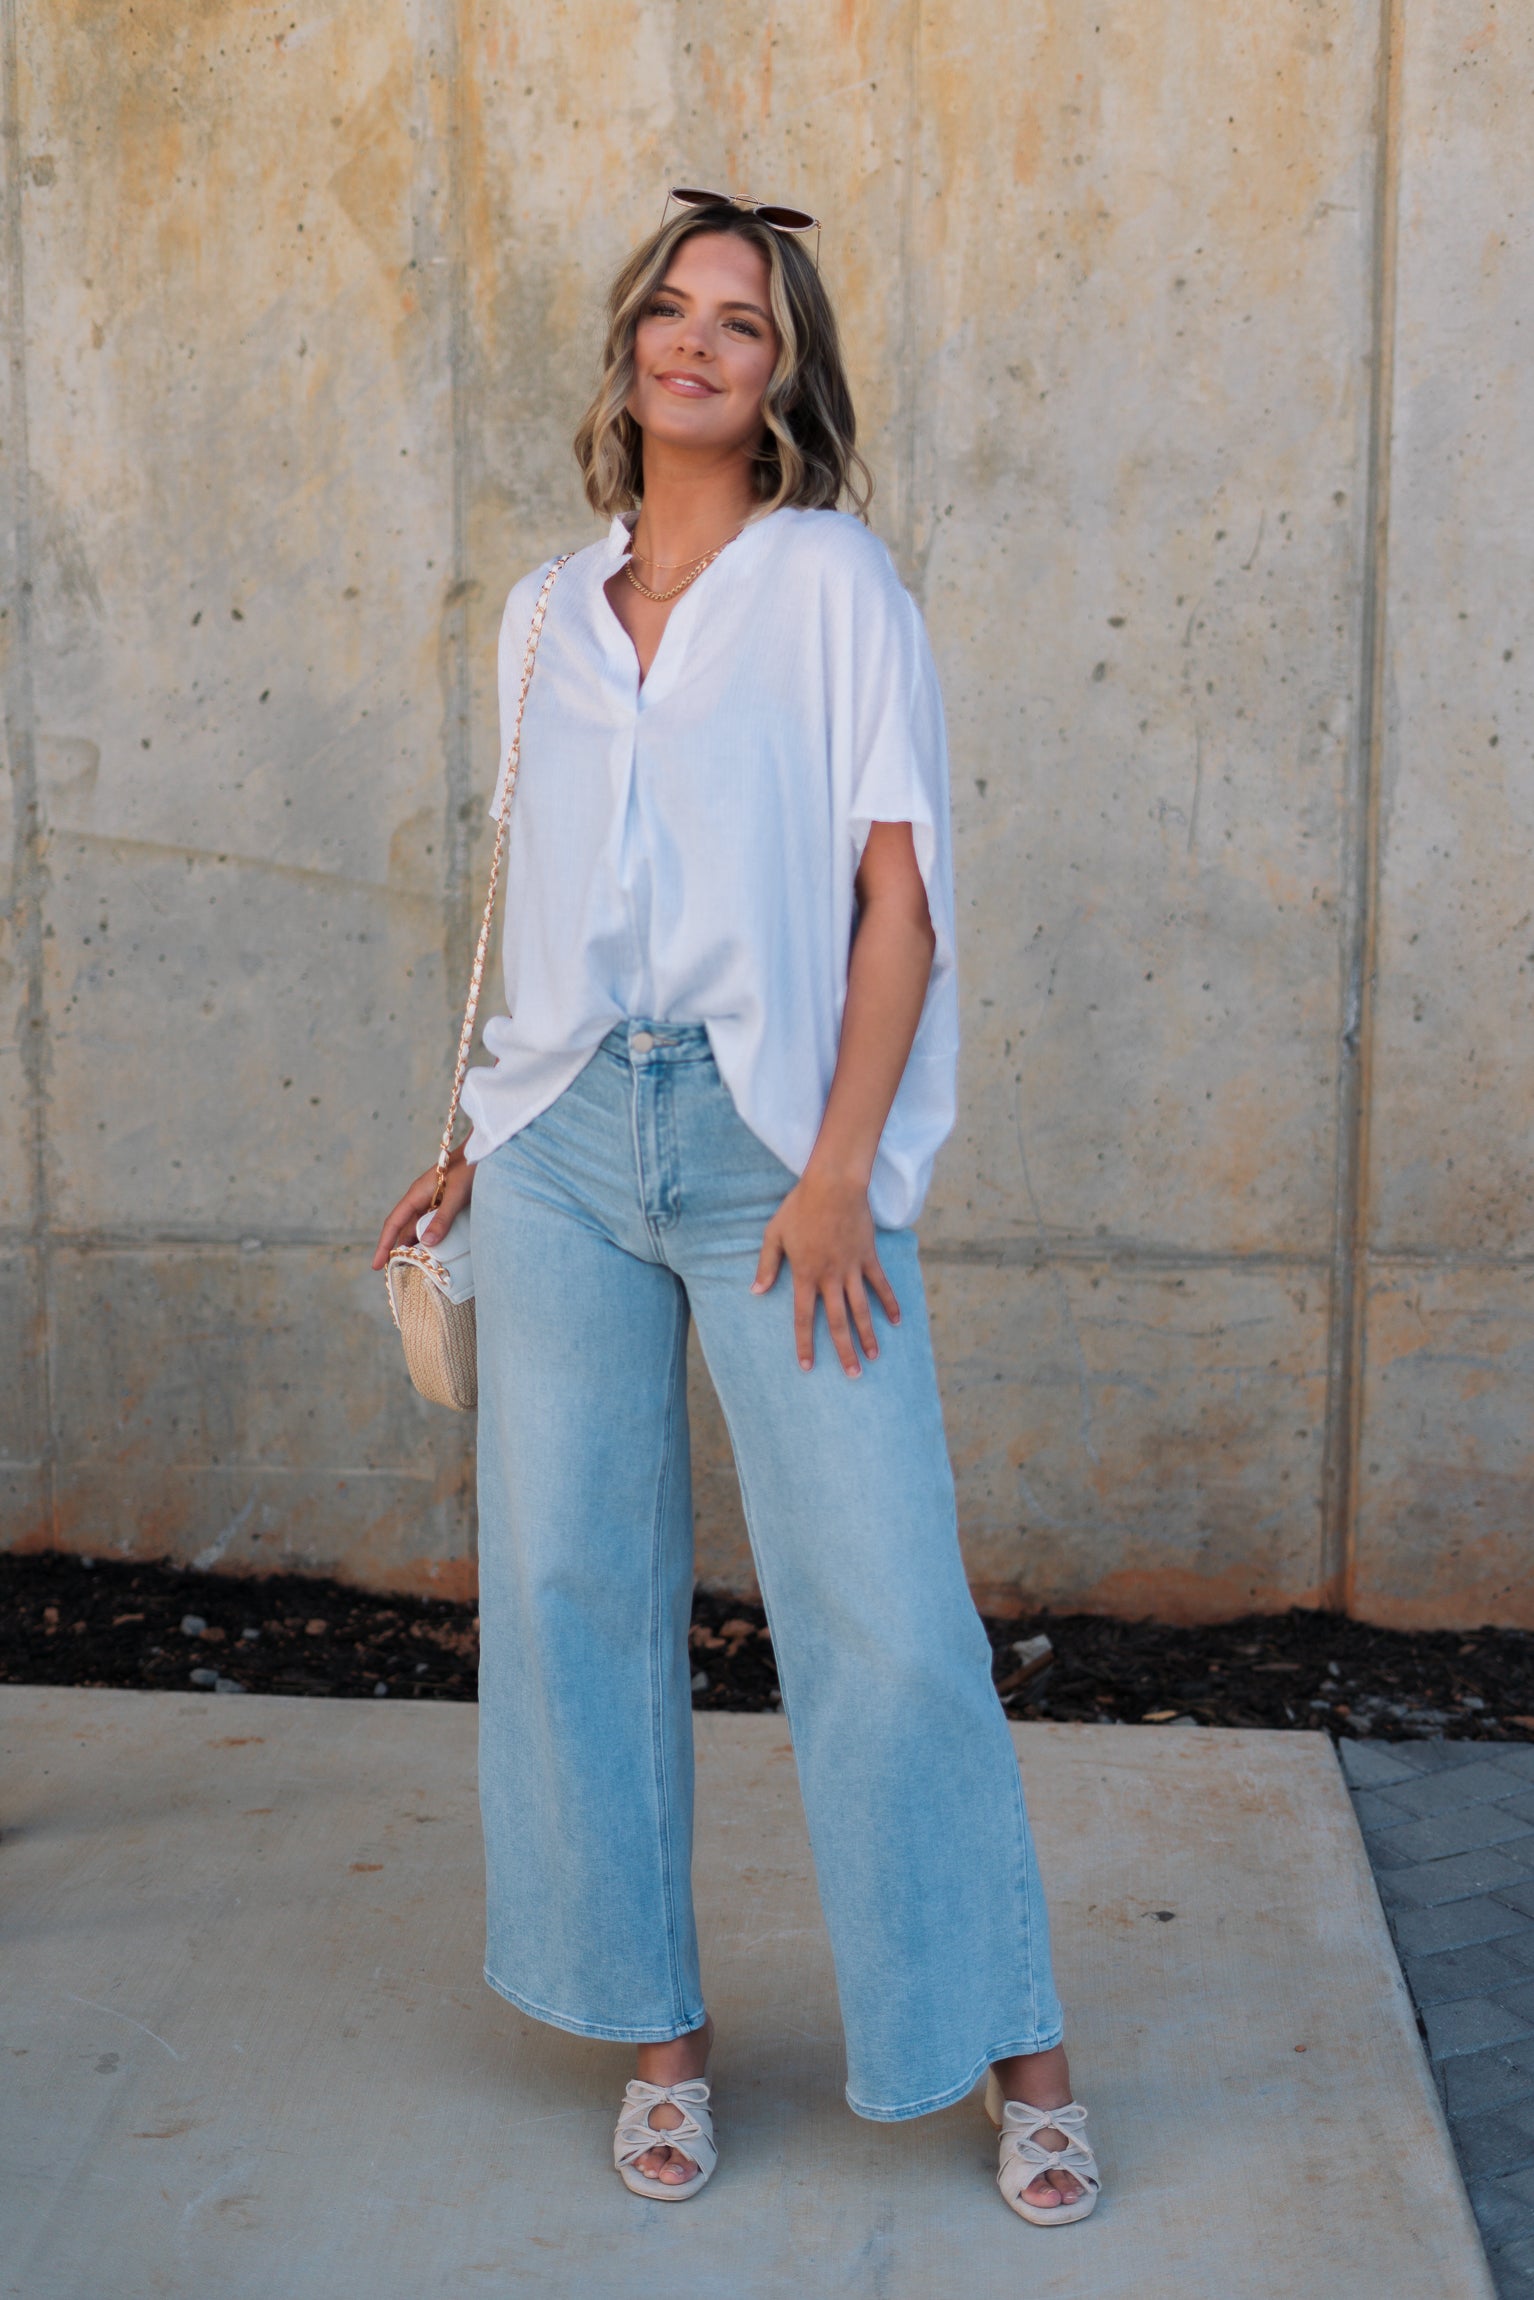 Full body front view of female model wearing the Thea White Lightweight Top that has lightweight white fabric with subtle monochrome stripes, oversized fit, v neckline, and short batwing sleeves. Shirt is front tucked into jeans.